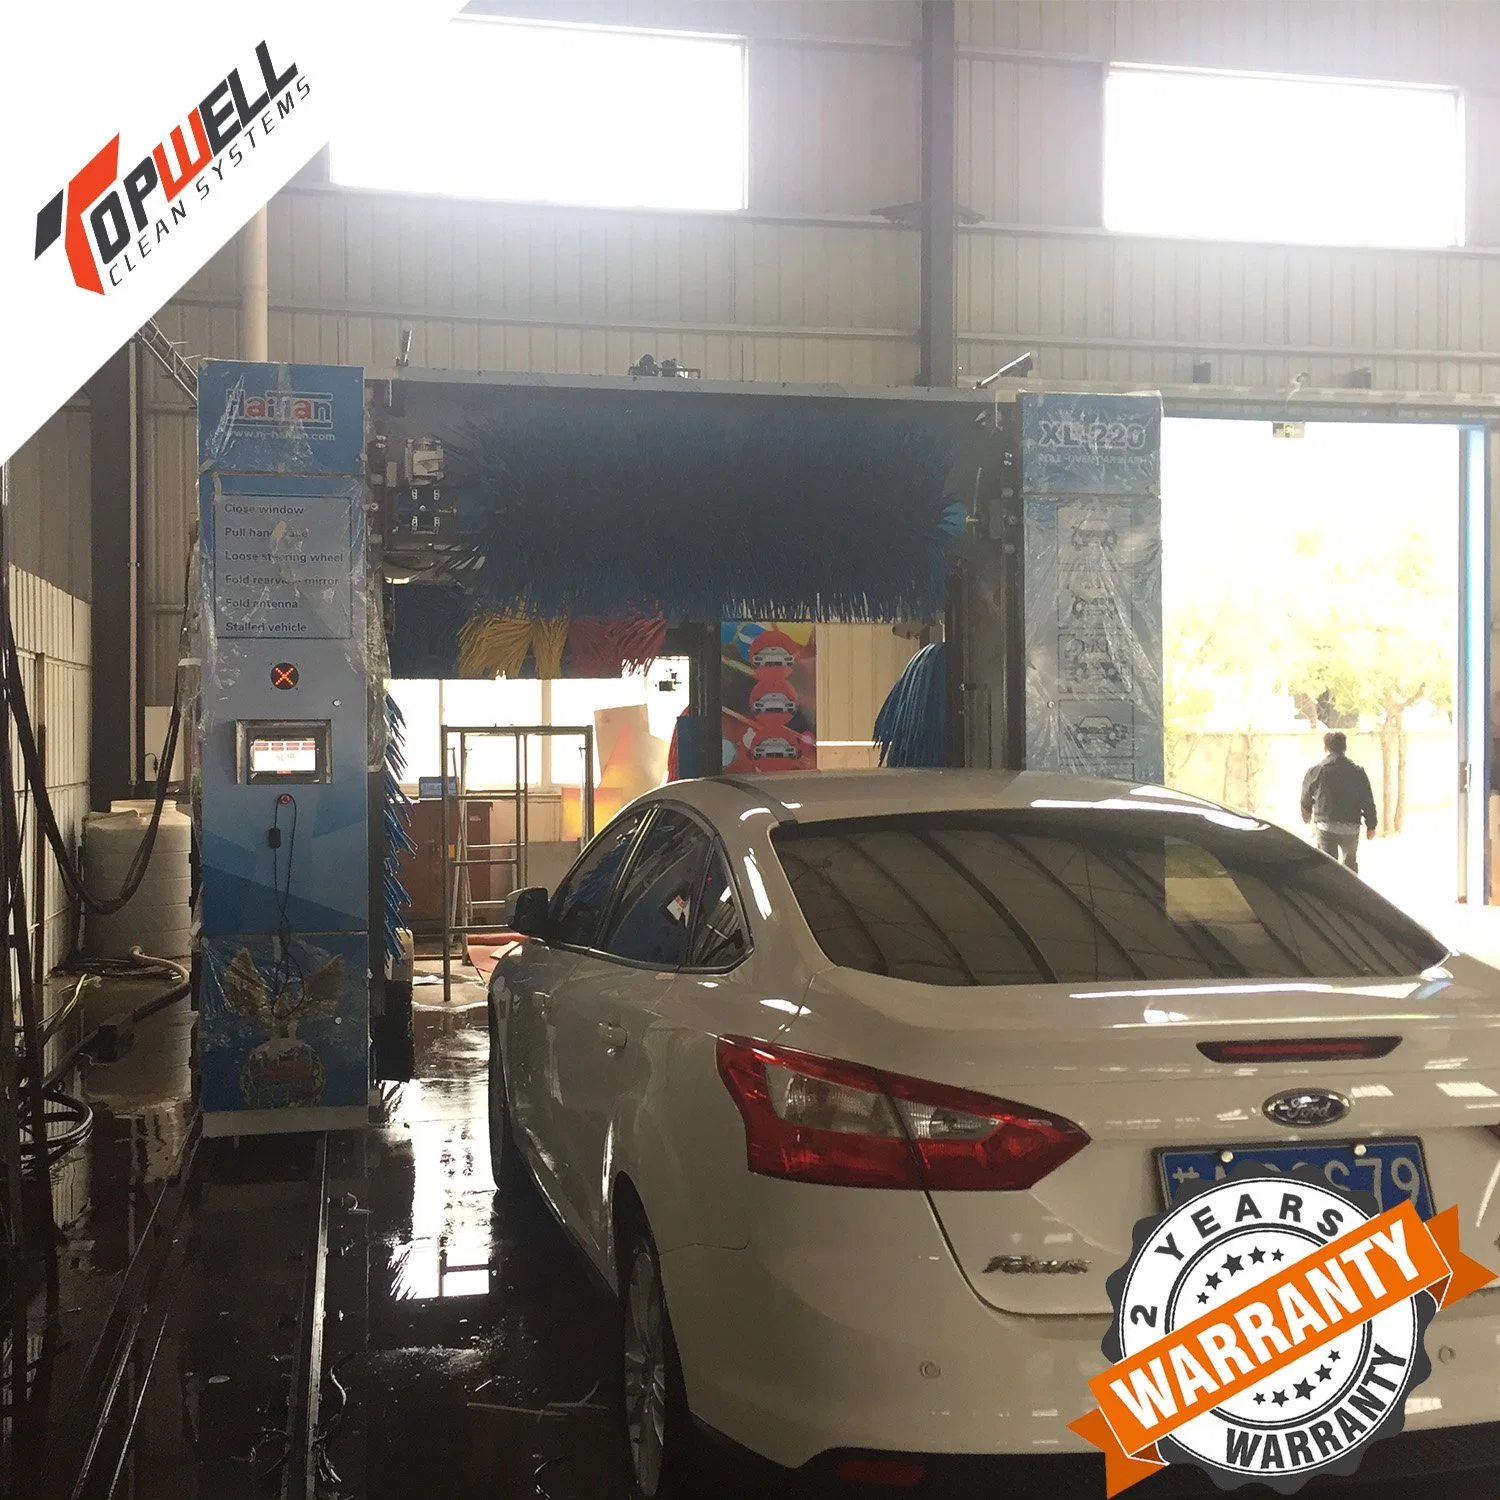 Auto Rollover Car Wash Machine with Foam and Wax Chemical Spray. China Car Wash Machine Supplier